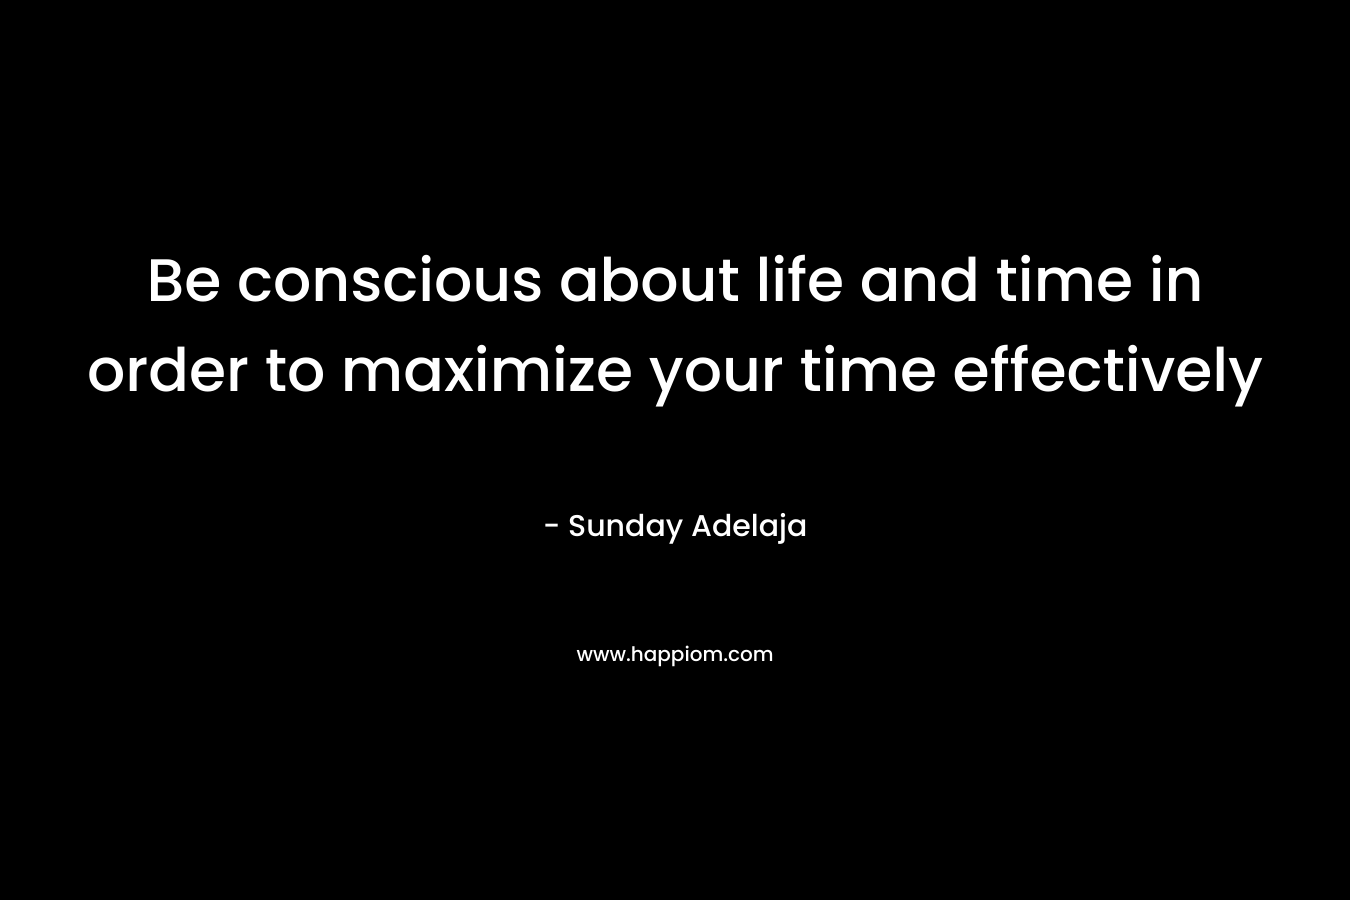 Be conscious about life and time in order to maximize your time effectively